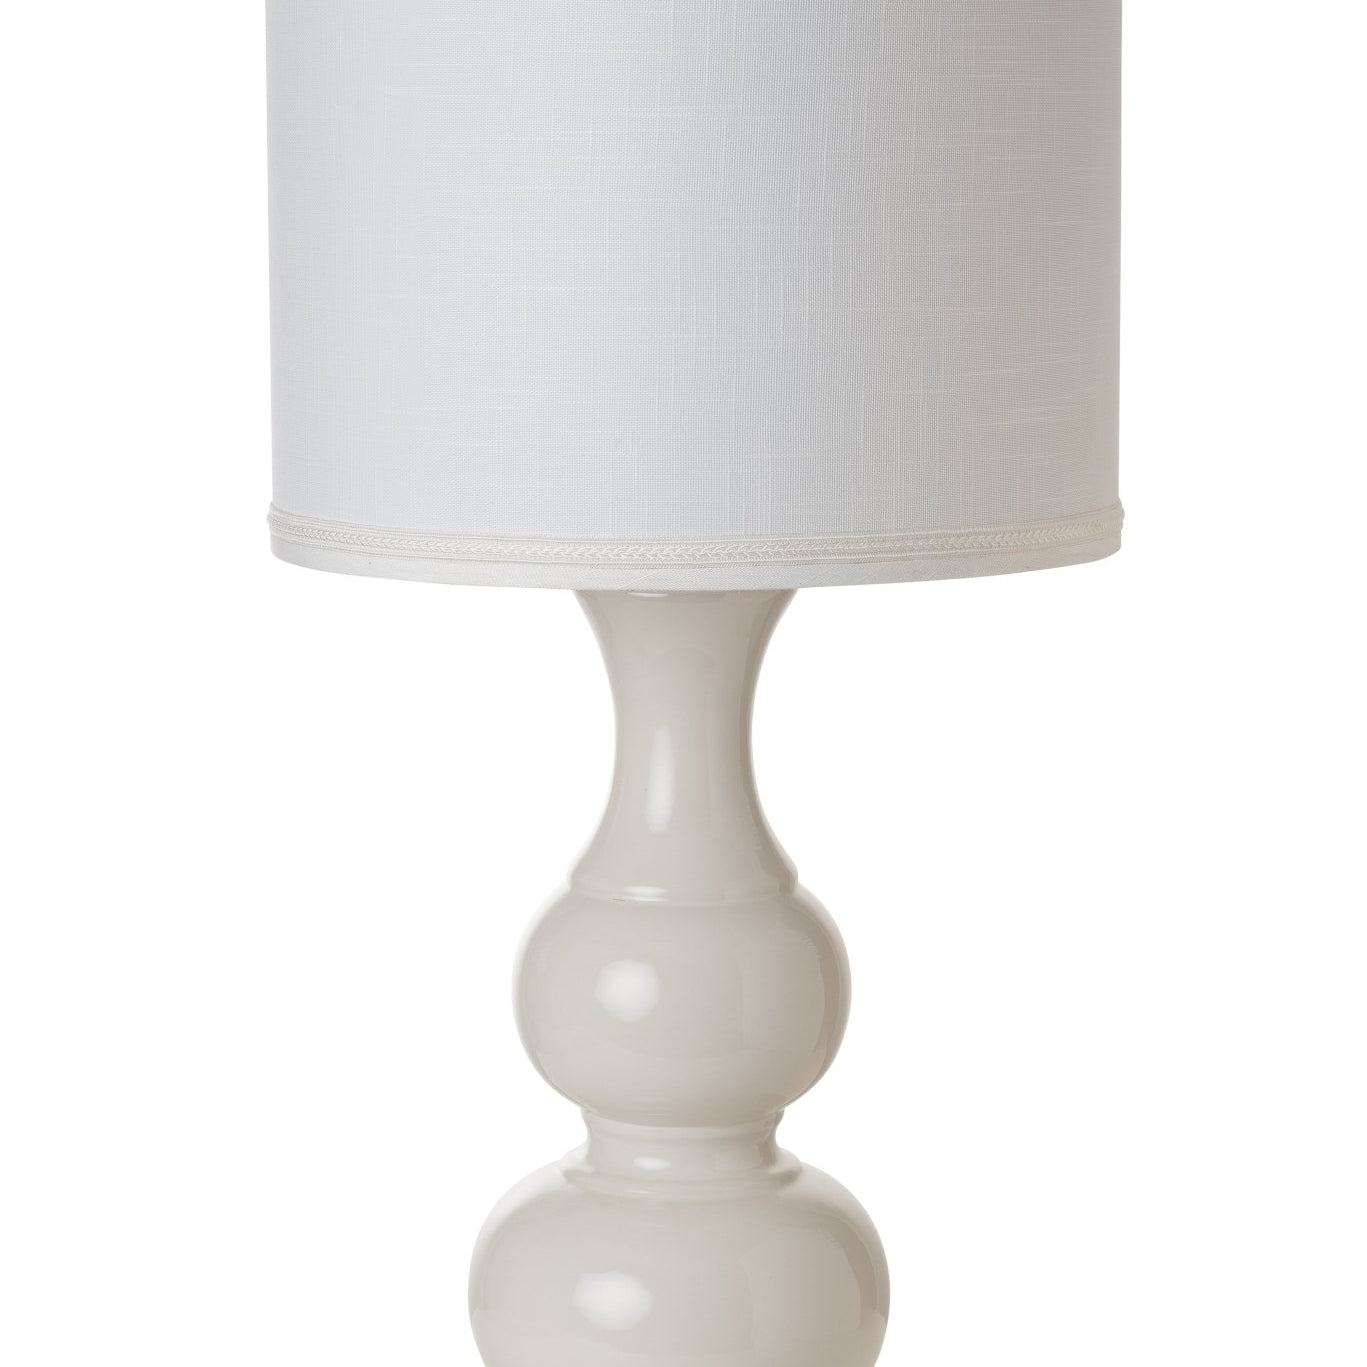 Warley 34" White Ceramic Table Lamp, (Set of 2) - Table Lamps